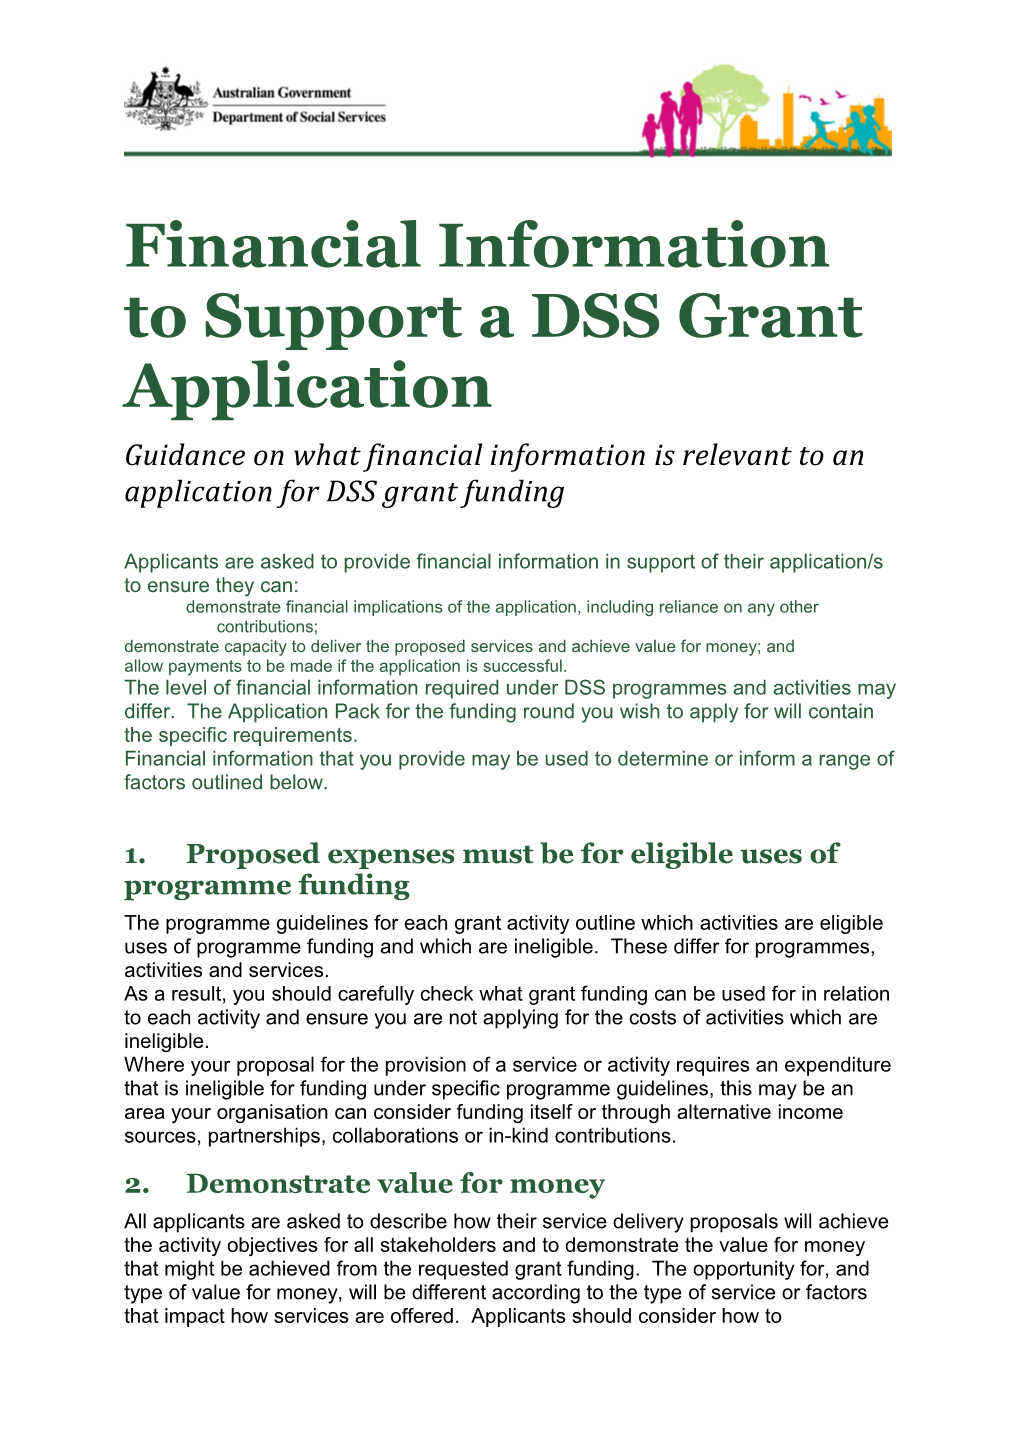 Financial Information to Support a DSS Grant Application